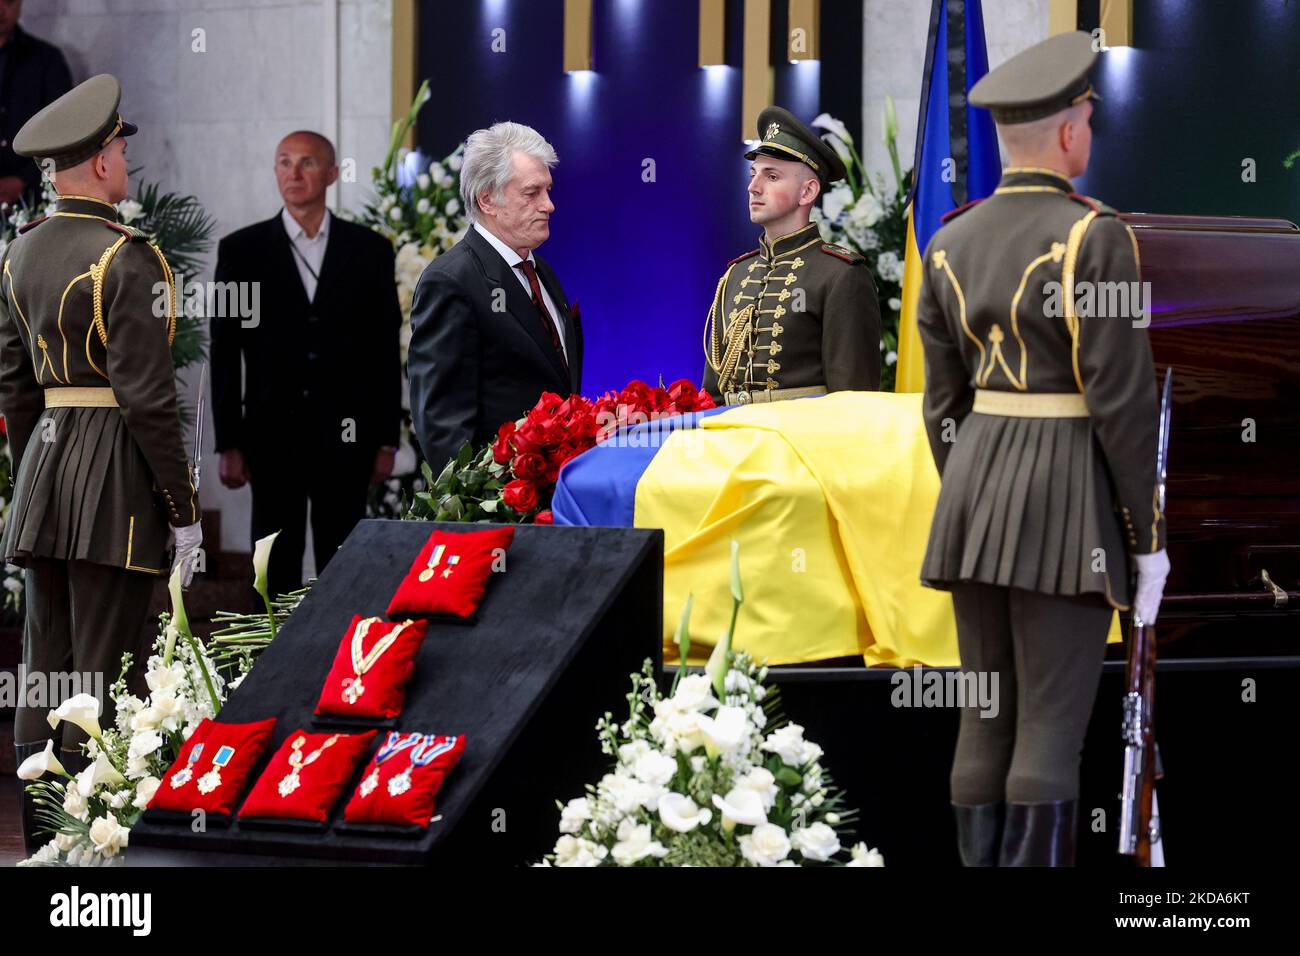 Former President of Ukraine Viktor Yushchenko lays flowers near the coffin with the body of Leonid Kravchuk in Kyiv, Ukraine, May 17, 2022. Dozens of politicians, artists, scientists and average citizens attend the farewell ceremony after the first President of Independent Ukraine Leonid Kravchuk, who died May 10, 2022 in Munich, Germany. (Photo by Sergii Kharchenko/NurPhoto) Stock Photo